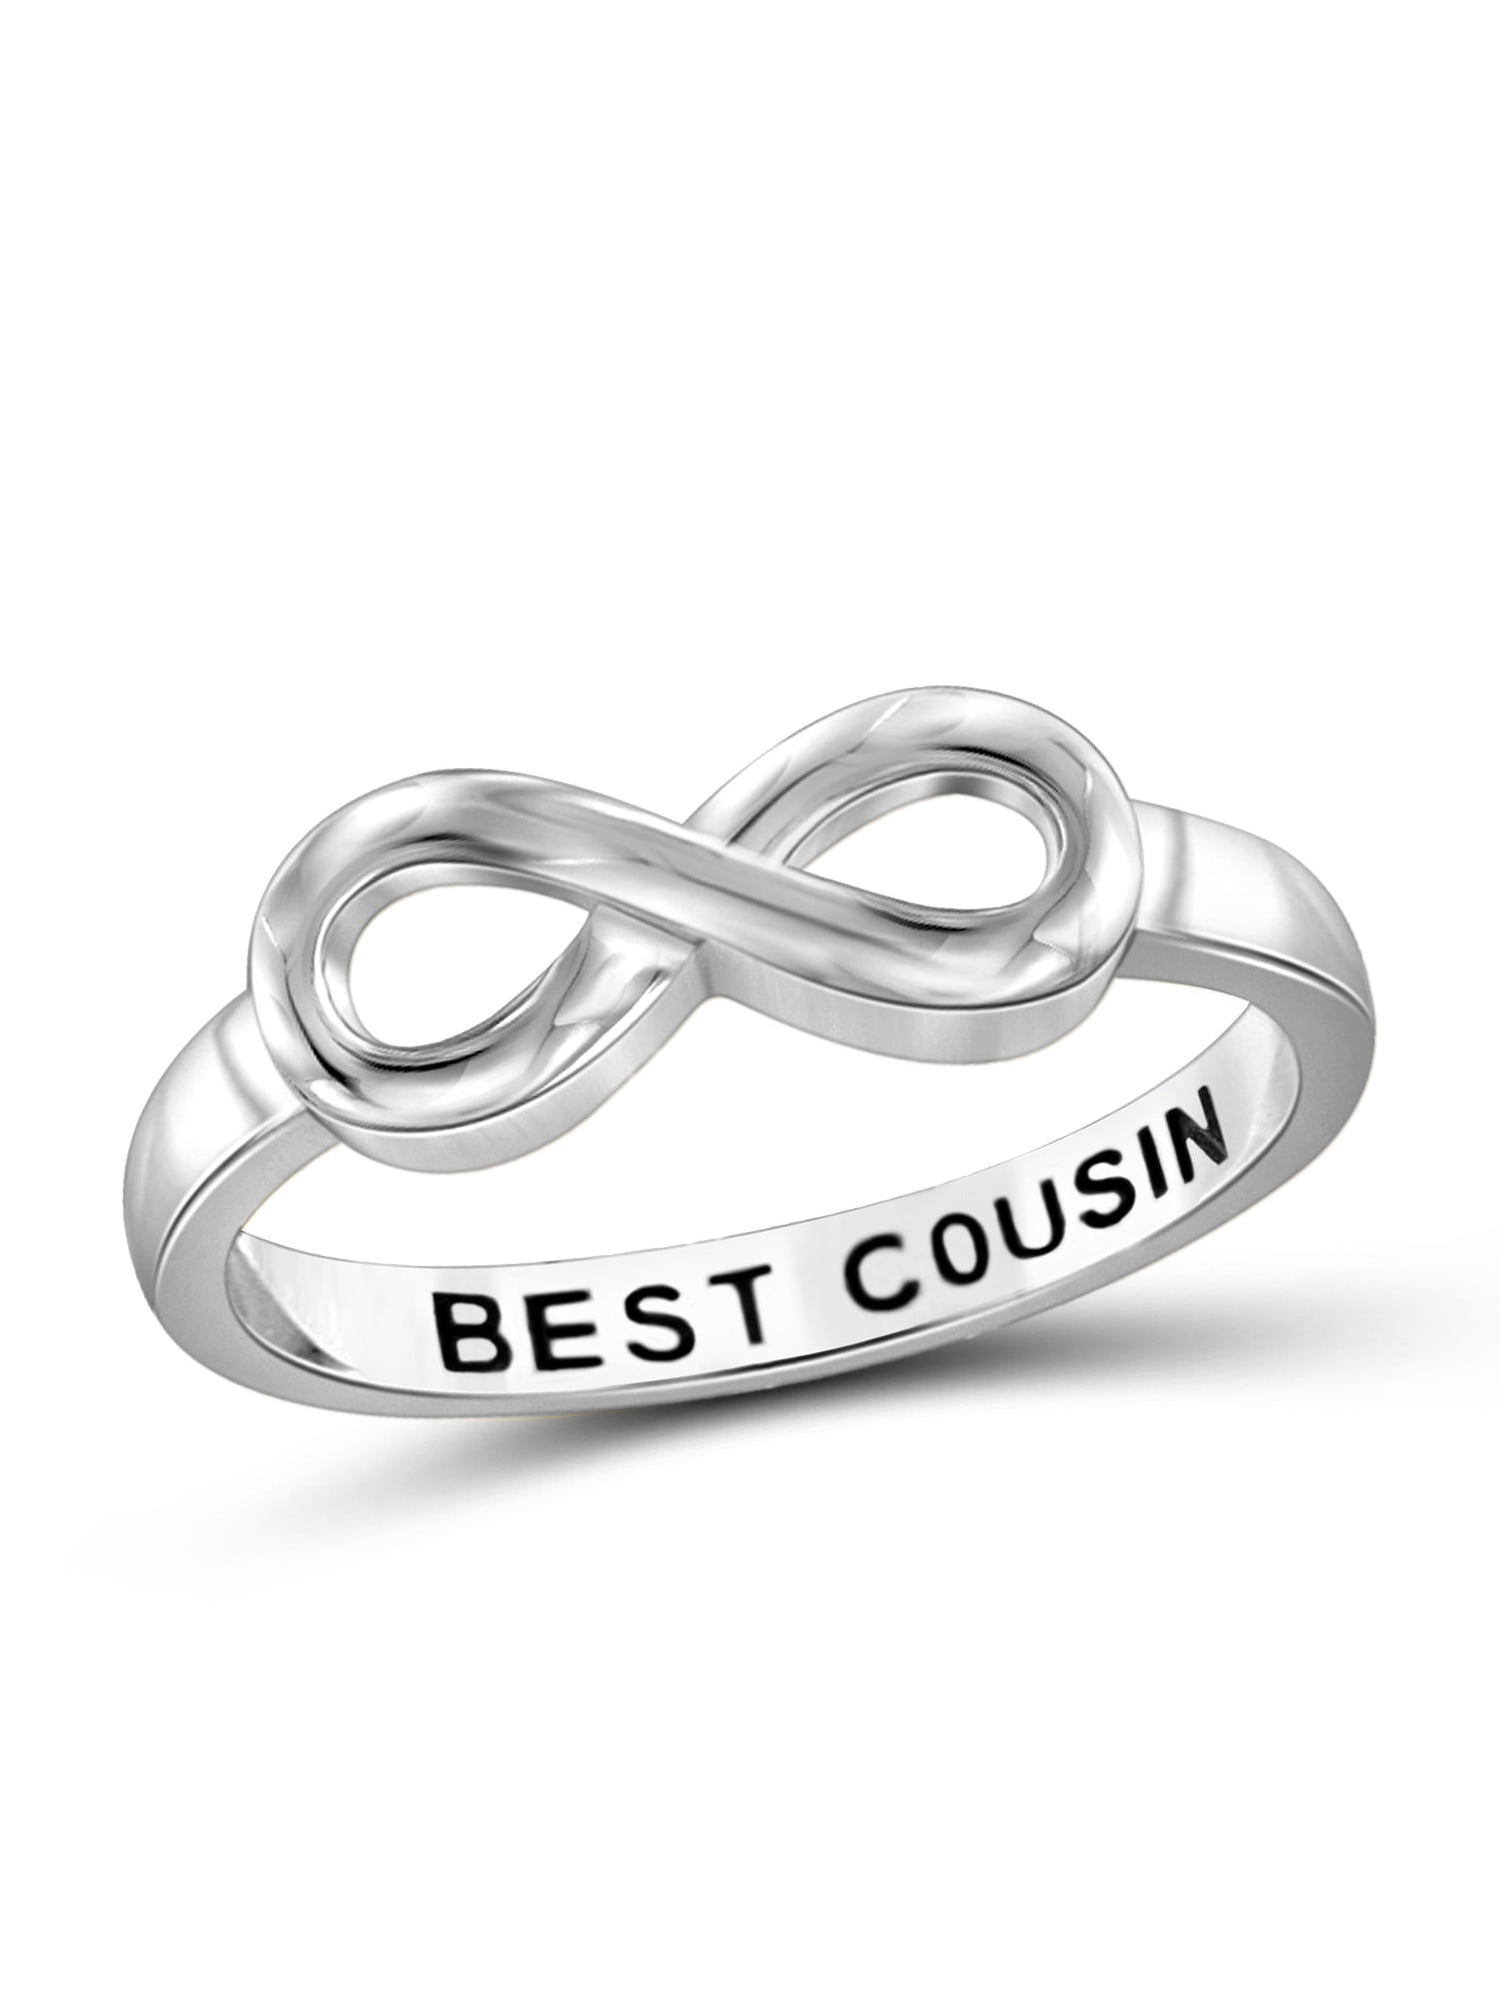 Buy ROWAWAFriendship Rings Mobius Twist Best Friend Ring for 2 Matching  Friends Bff Soul Sister Couples Twin His and Her Love Gifts Simple Promise  Pinky Personalized Engraved Custom Name Sterling Silver Online